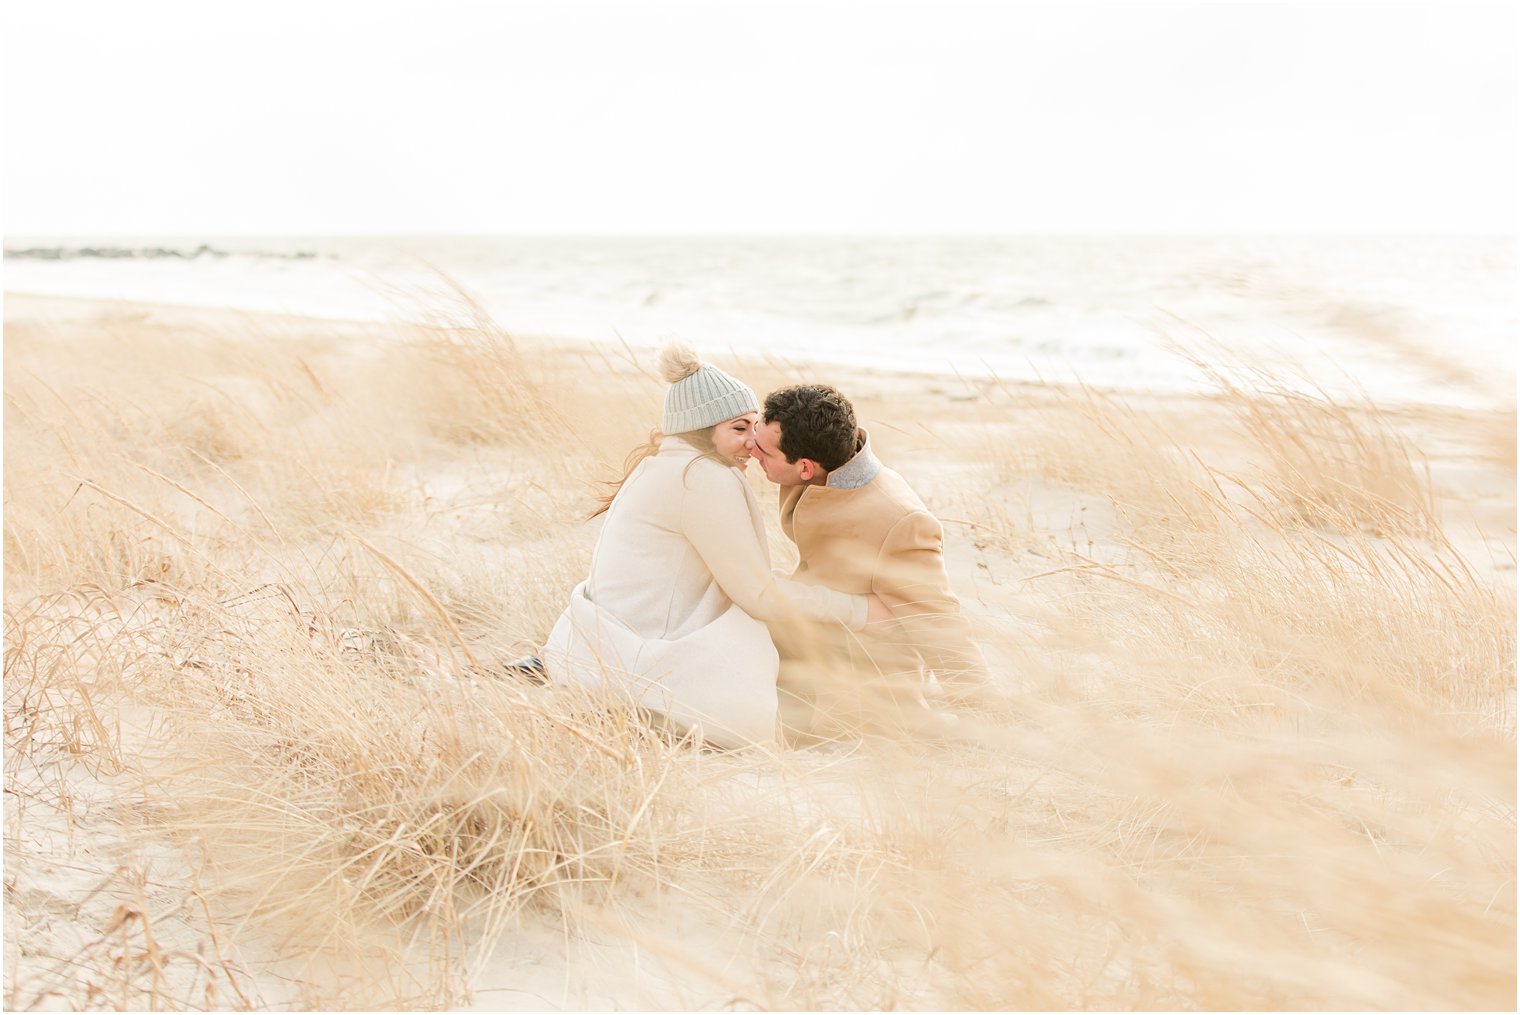 Engaged couple sitting on a blanket in the sand dunes and kissing 